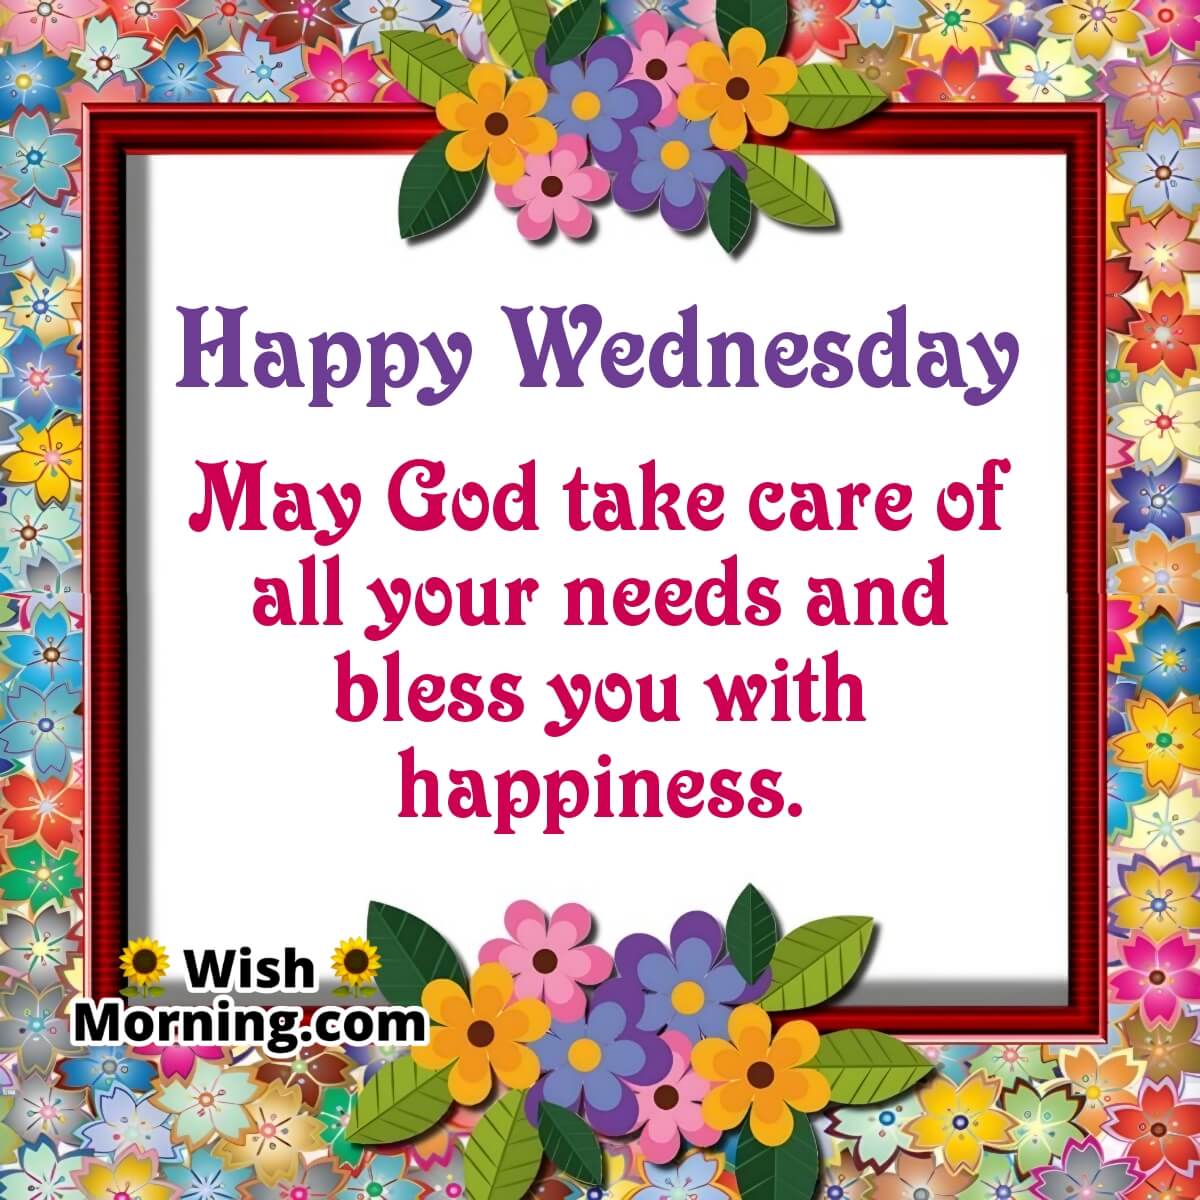 Happy Wednesday Morning God Bless You